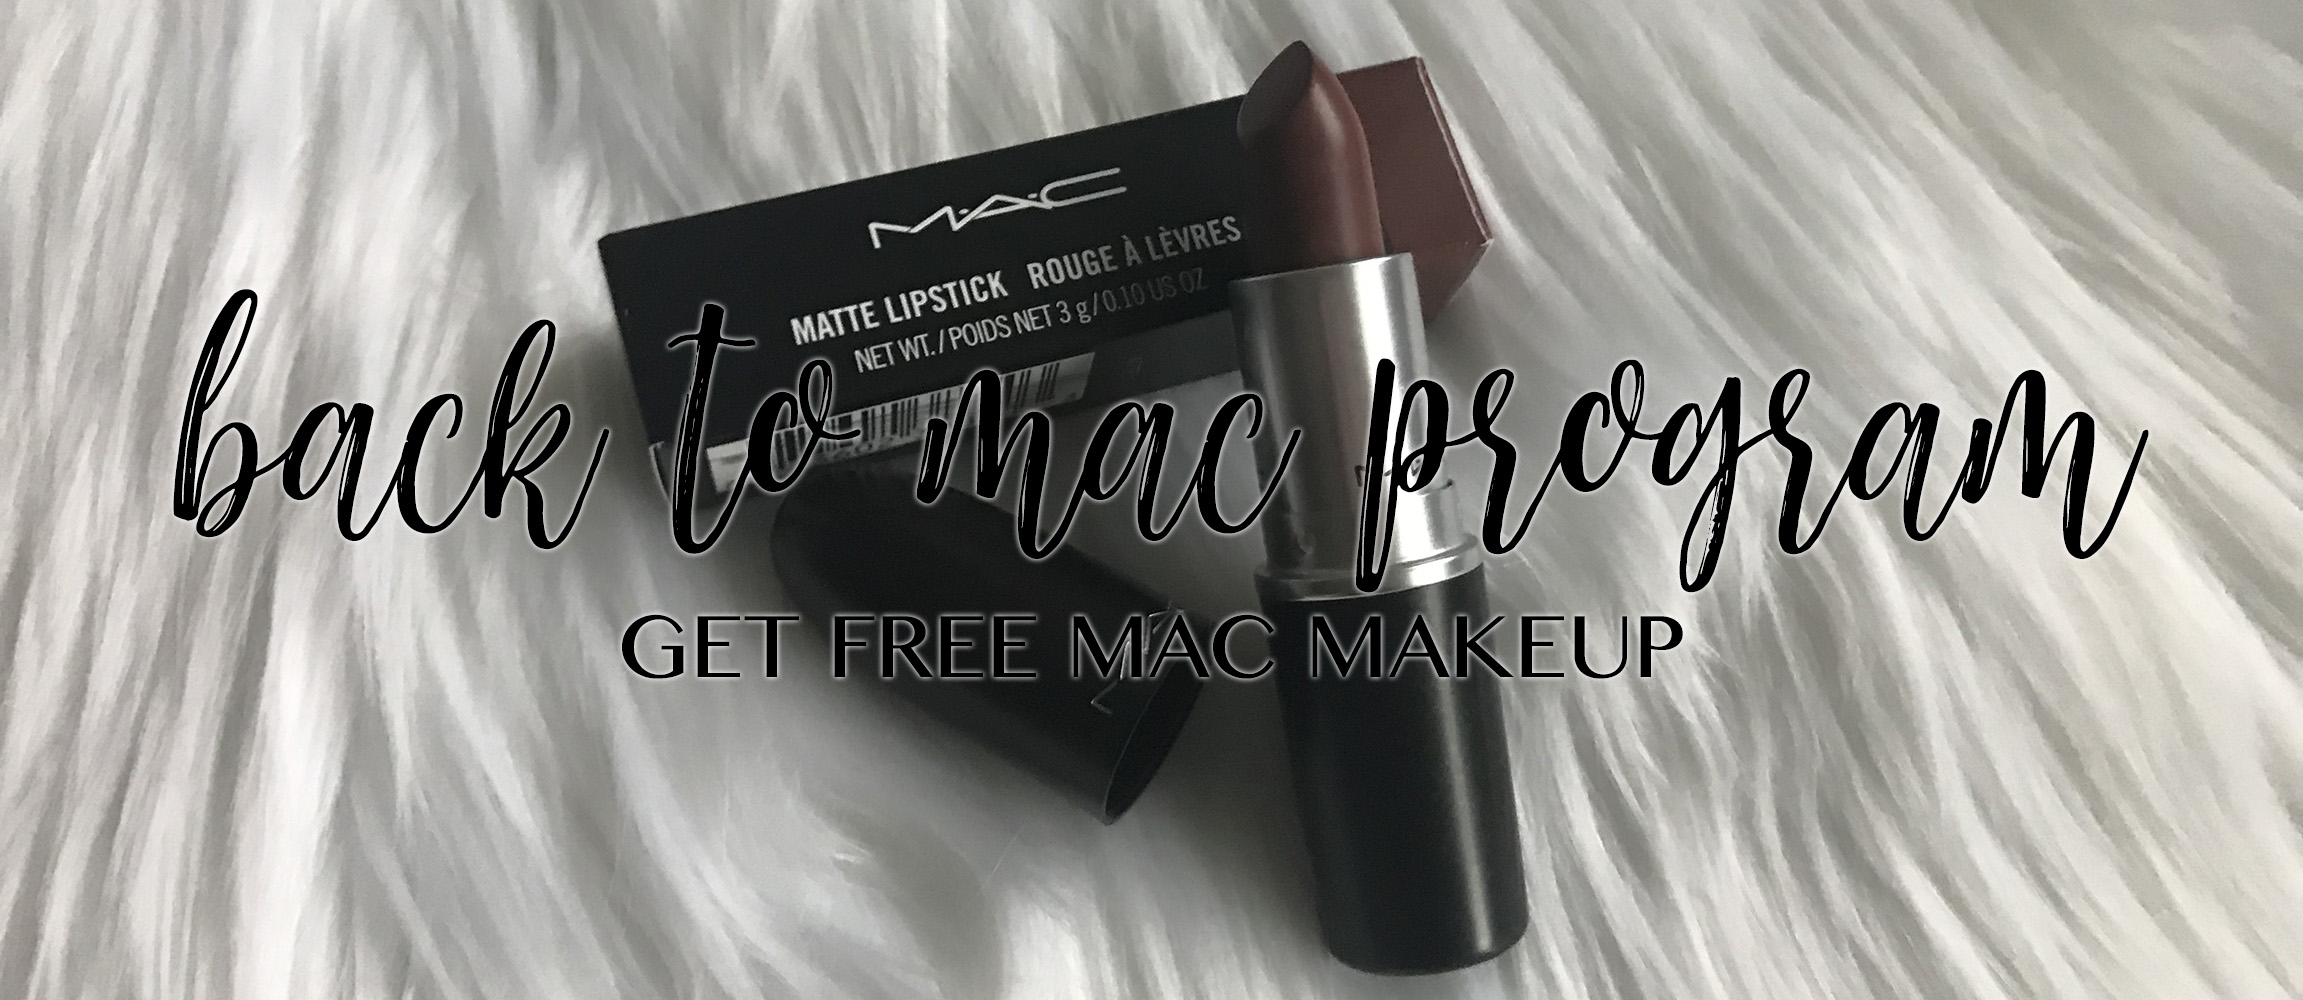 Get Free MAC Makeup with the Back To MAC Program